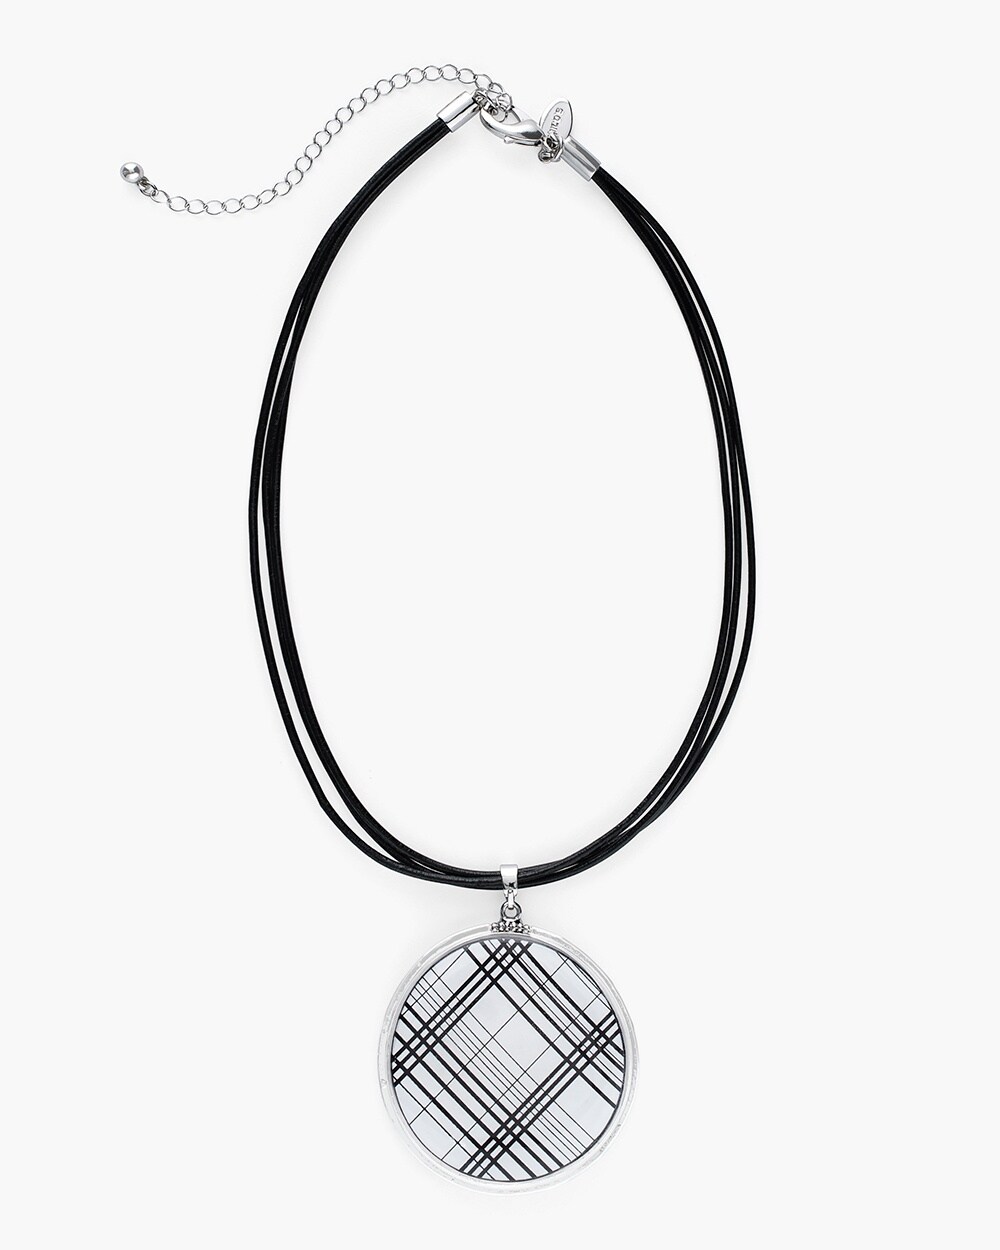 Reversible Black and White Pendant Necklace